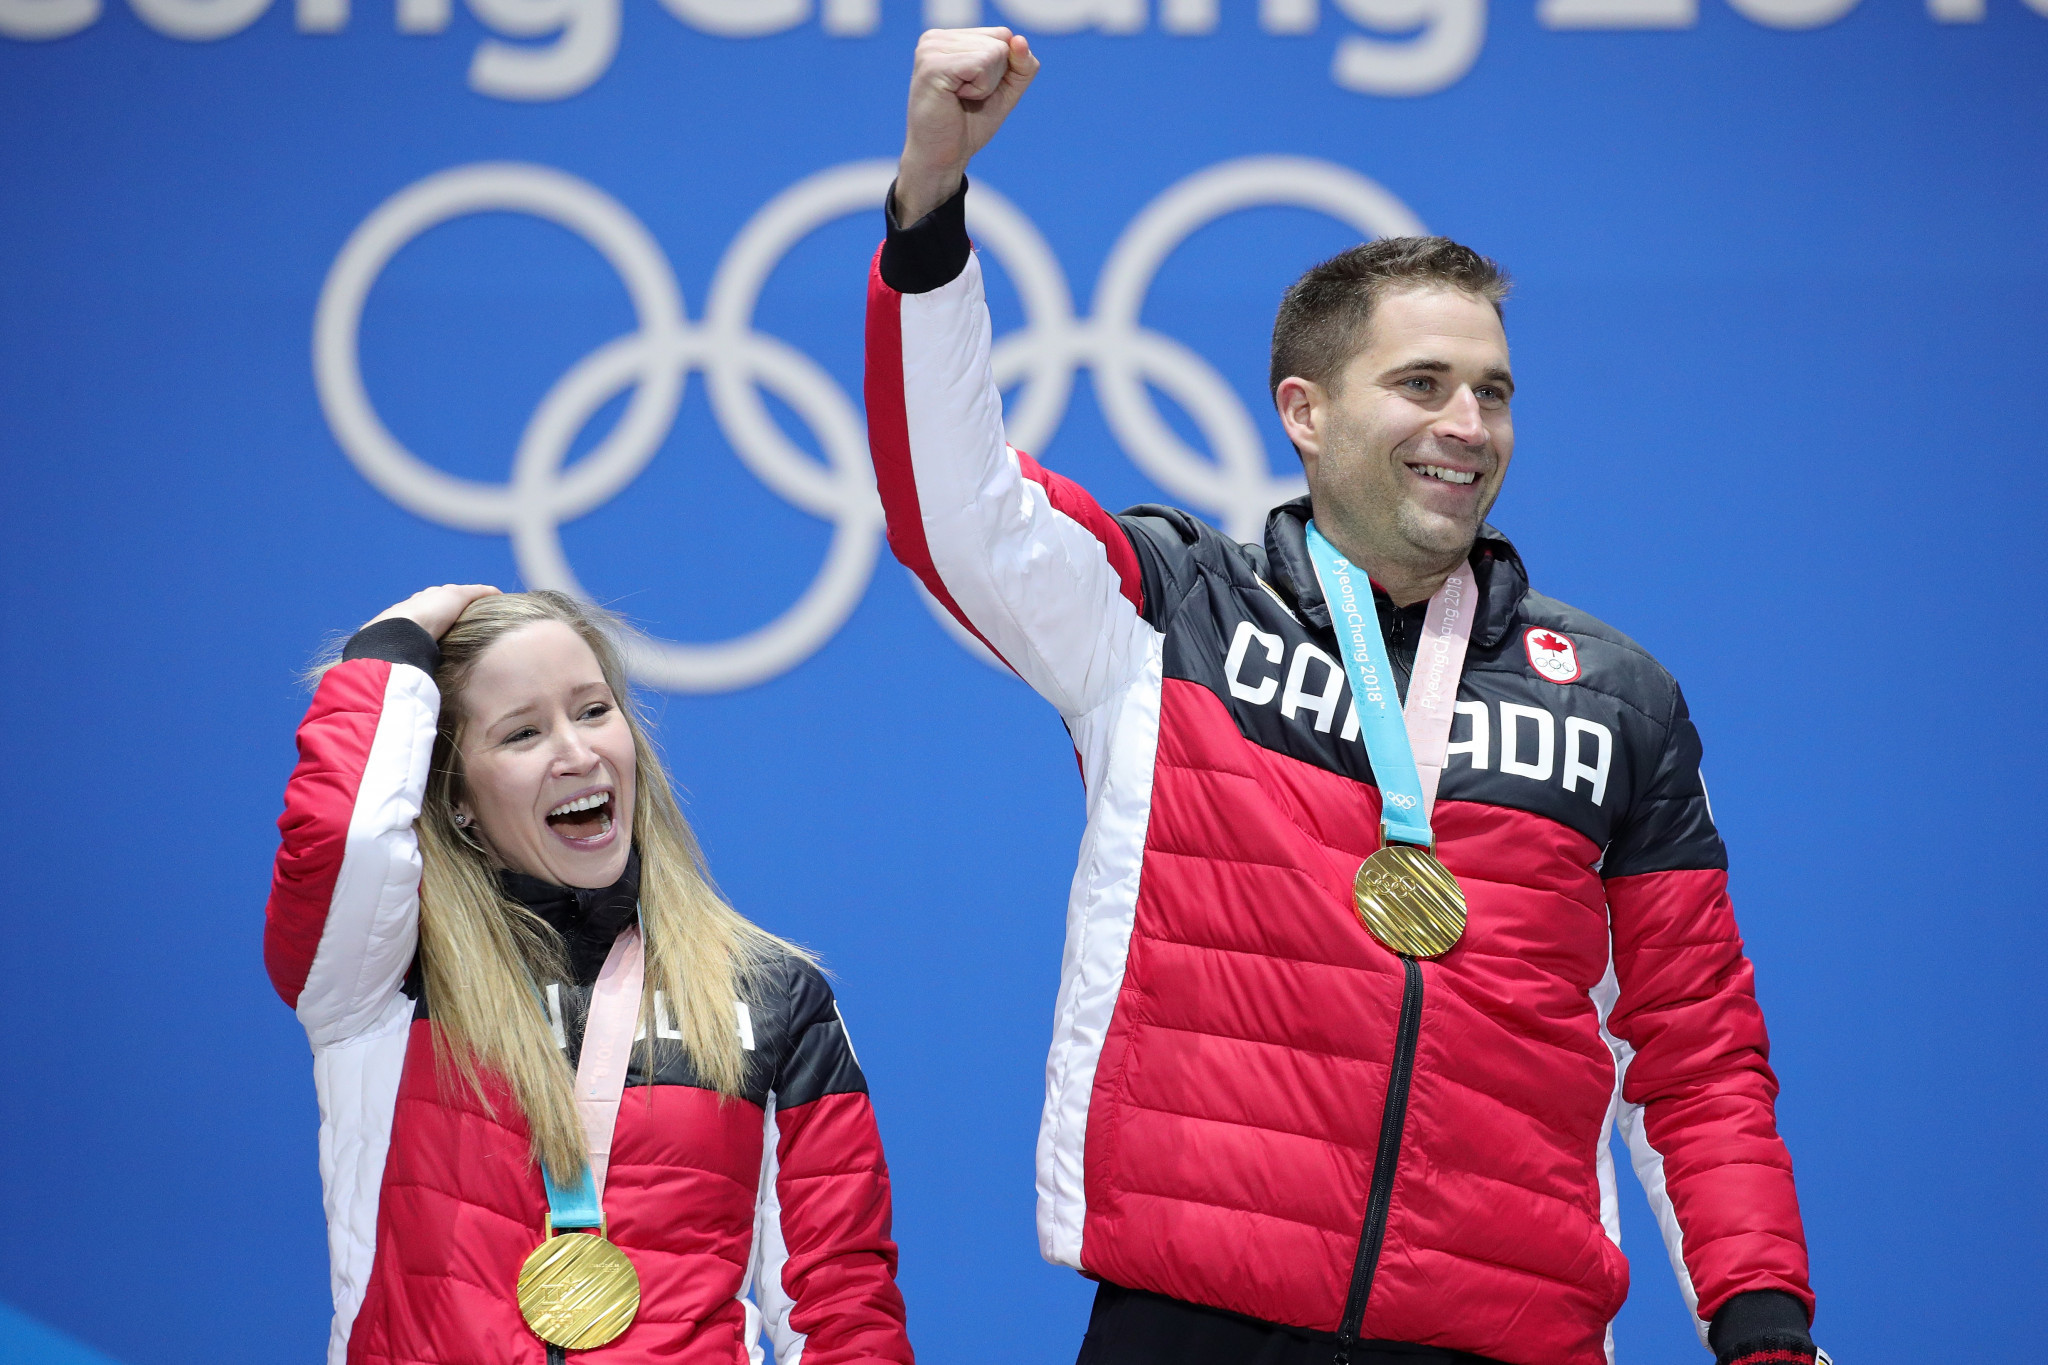 Olympic mixed doubles champions included on Curling Canada's national team programme for new season